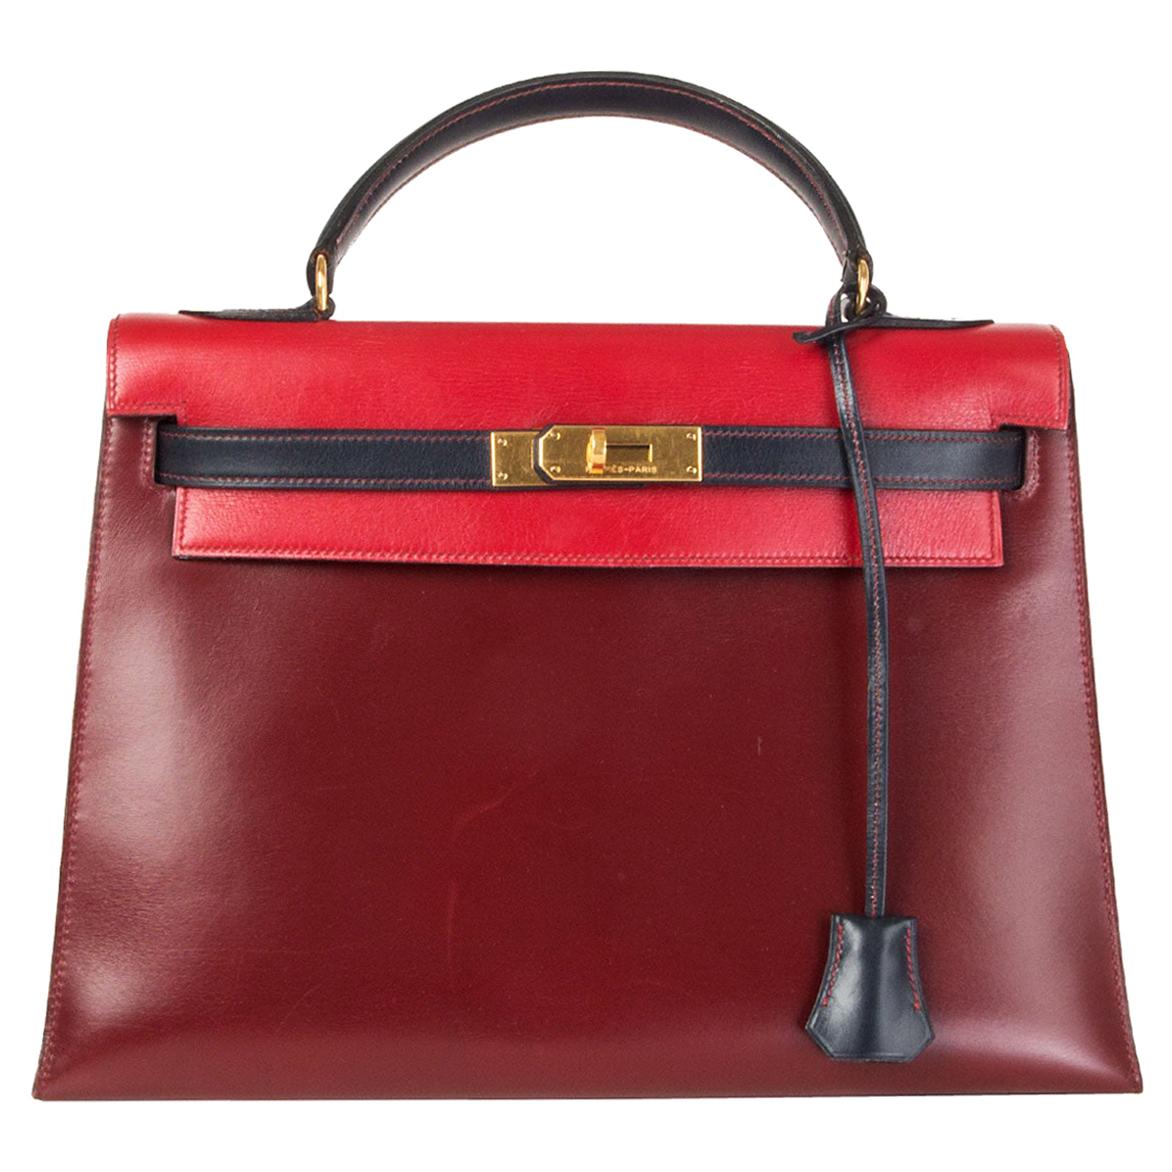 HERMES Rouge H & Vif red Marine blue Box leather KELLY 32 SELLIER Bag Tri-Color